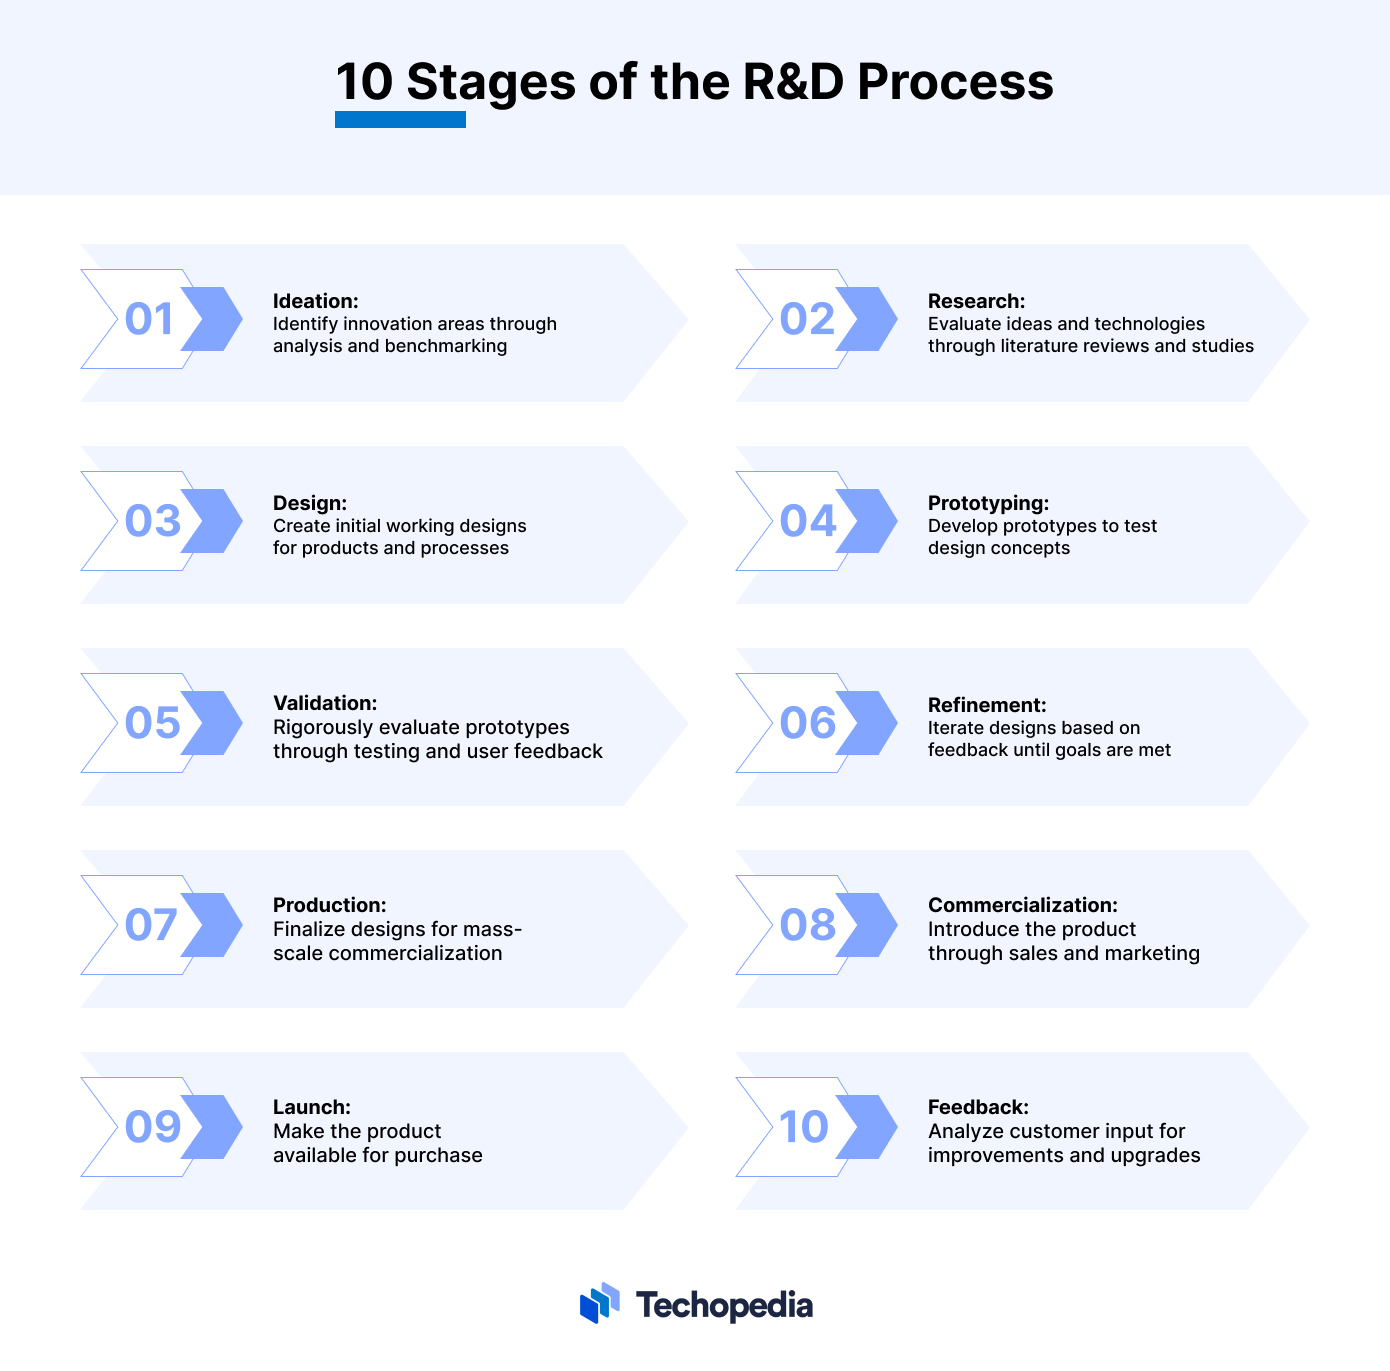 10 Stages of the R&D Process